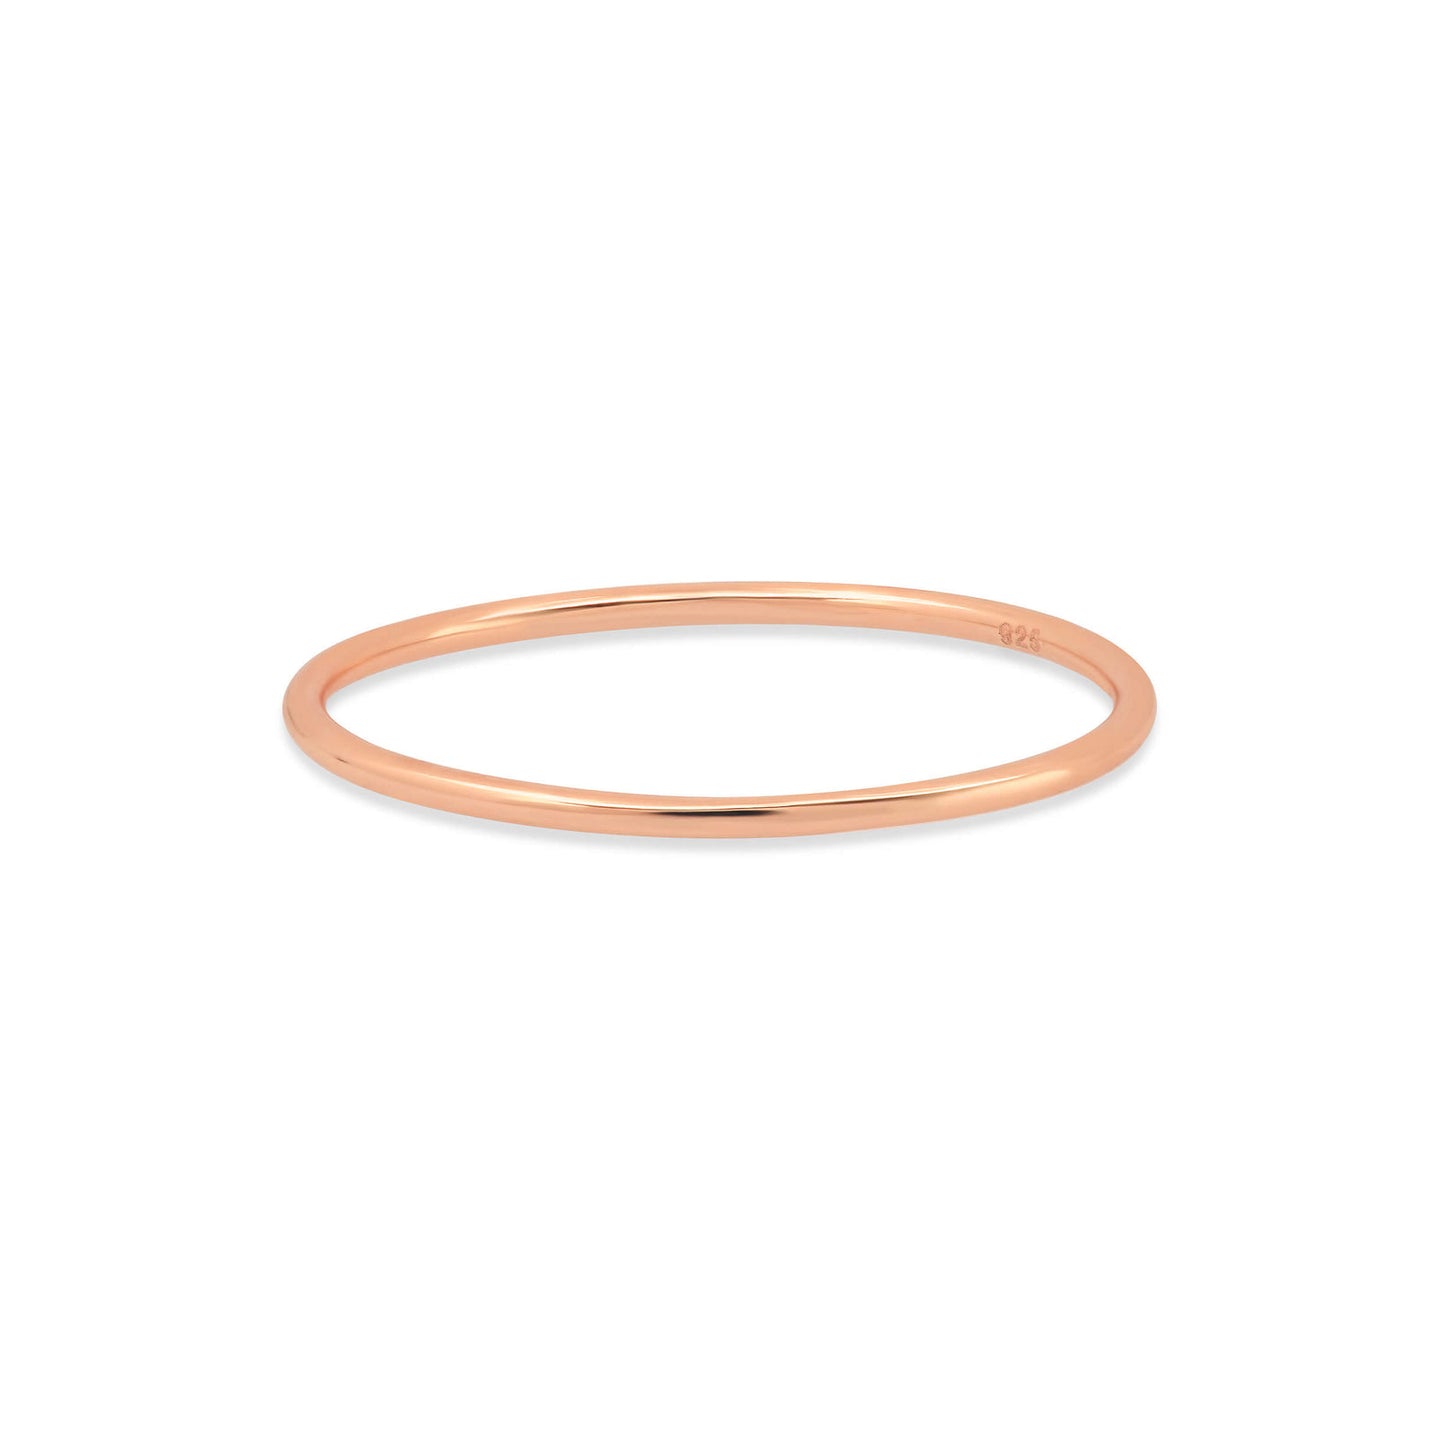 ONE LINE RING, ROSE GOLD